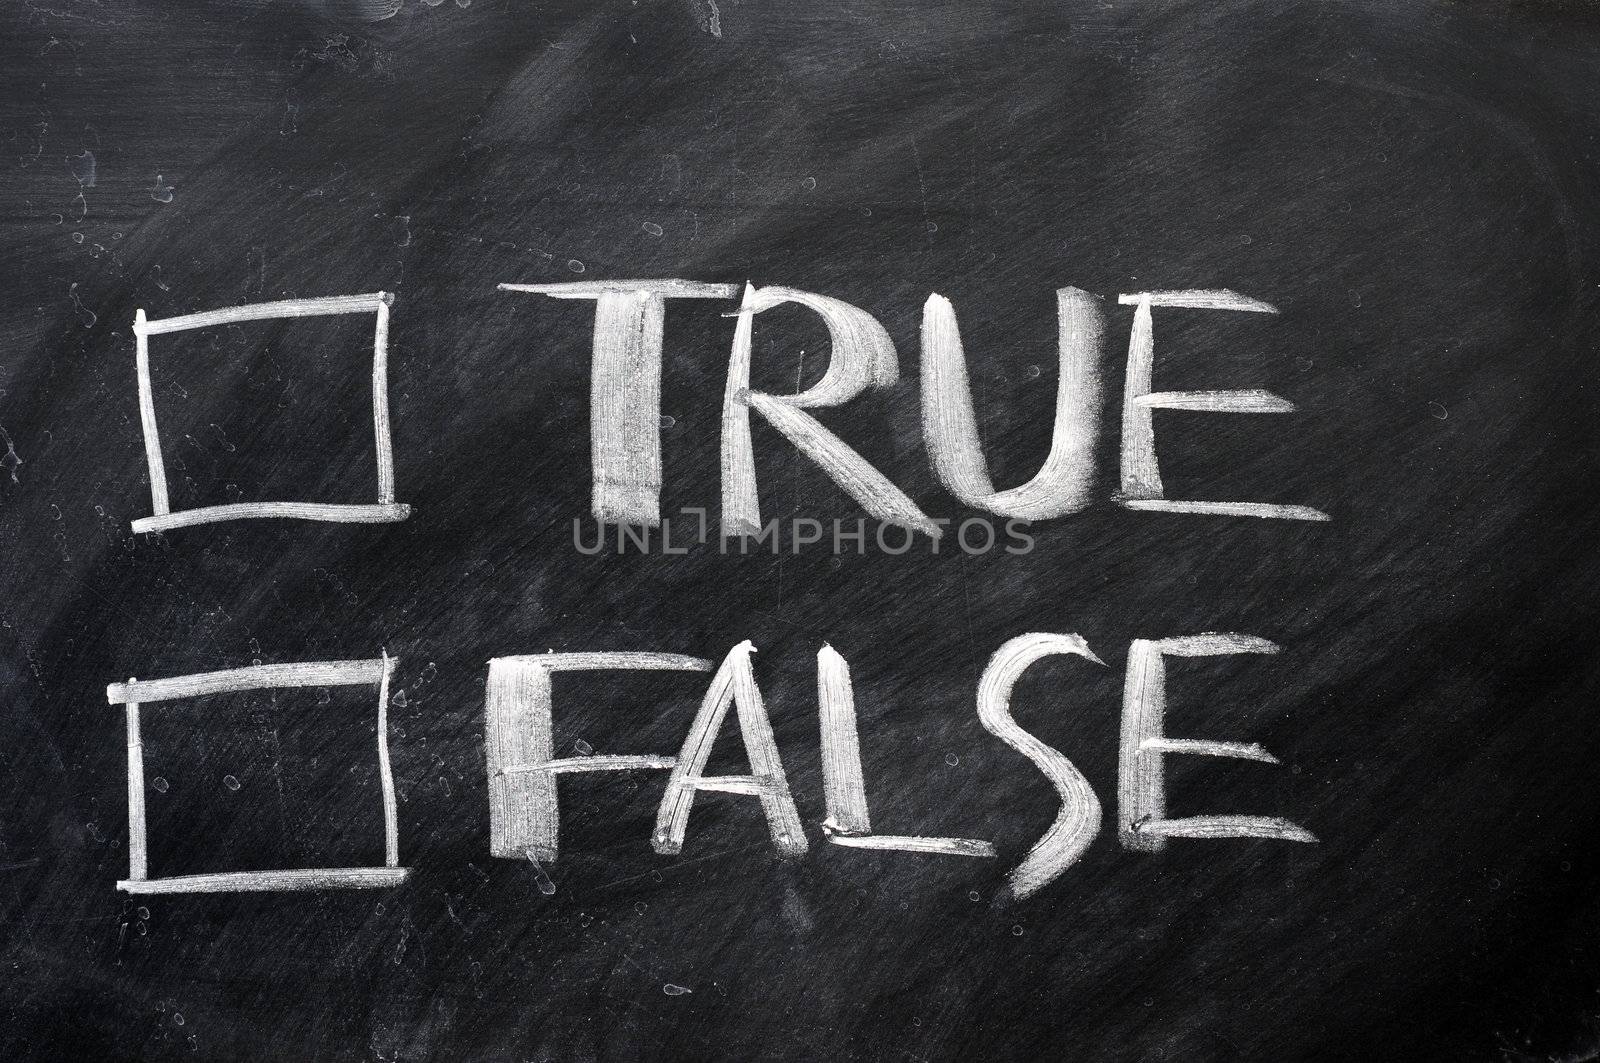 True and false check boxes written with chalk on a blackboard